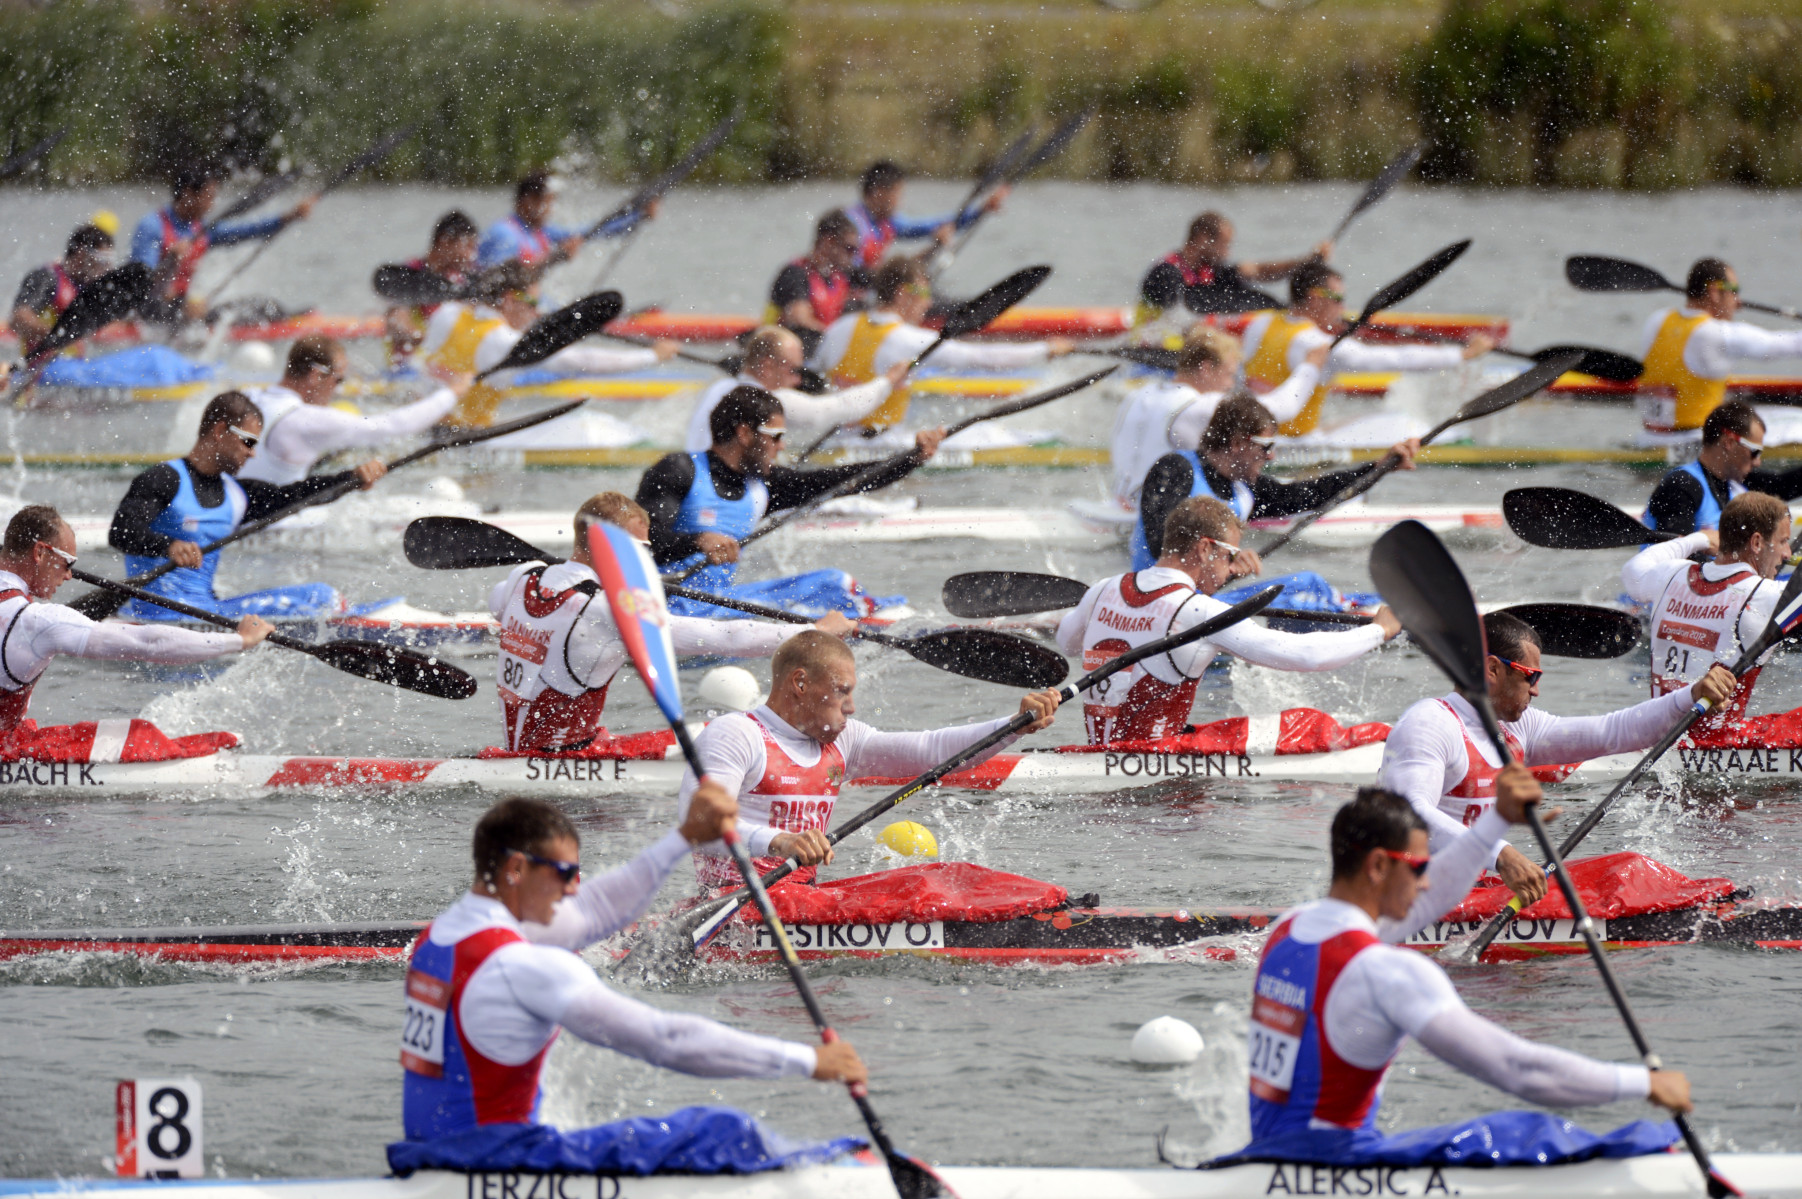 Men's Kayak 4 (K4) 1000 Meter Sprint at Eton Dorney during the London Olympics.  : London Olympics : Photography by Adam Stoltman: Sports Photography, The Arts, Portraiture, Travel, Photojournalism and Fine Art in New York